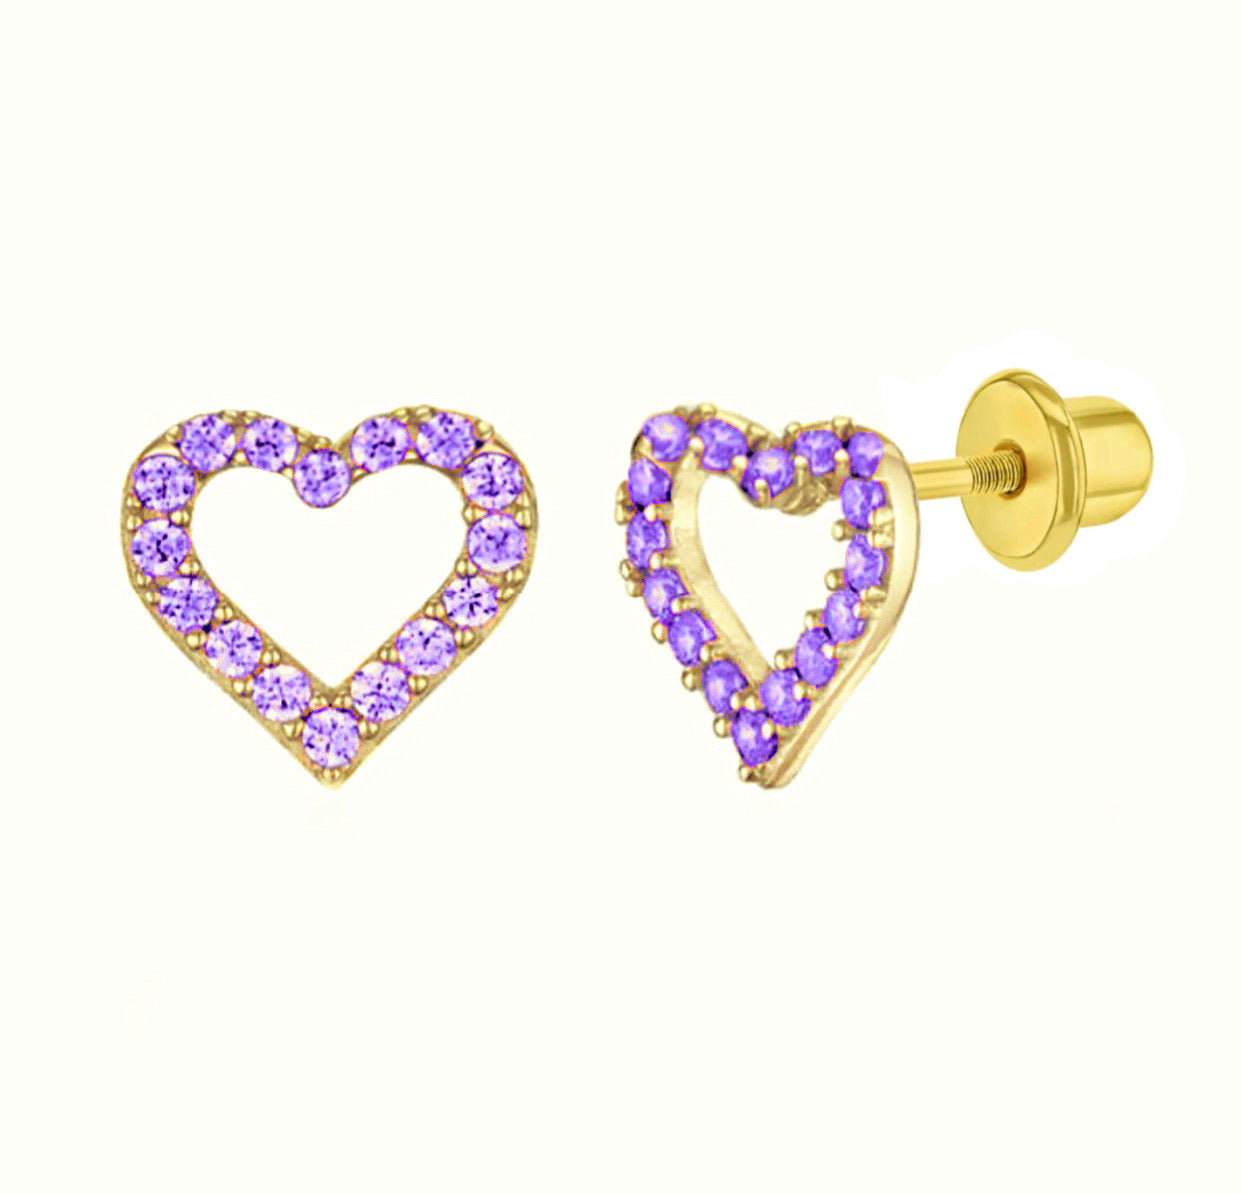 14K Gold Plated 925 Sterling Silver Open Heart CZ Stones Screw Back Earring For Baby, Kids, Teens - Forever Kids Jewelry